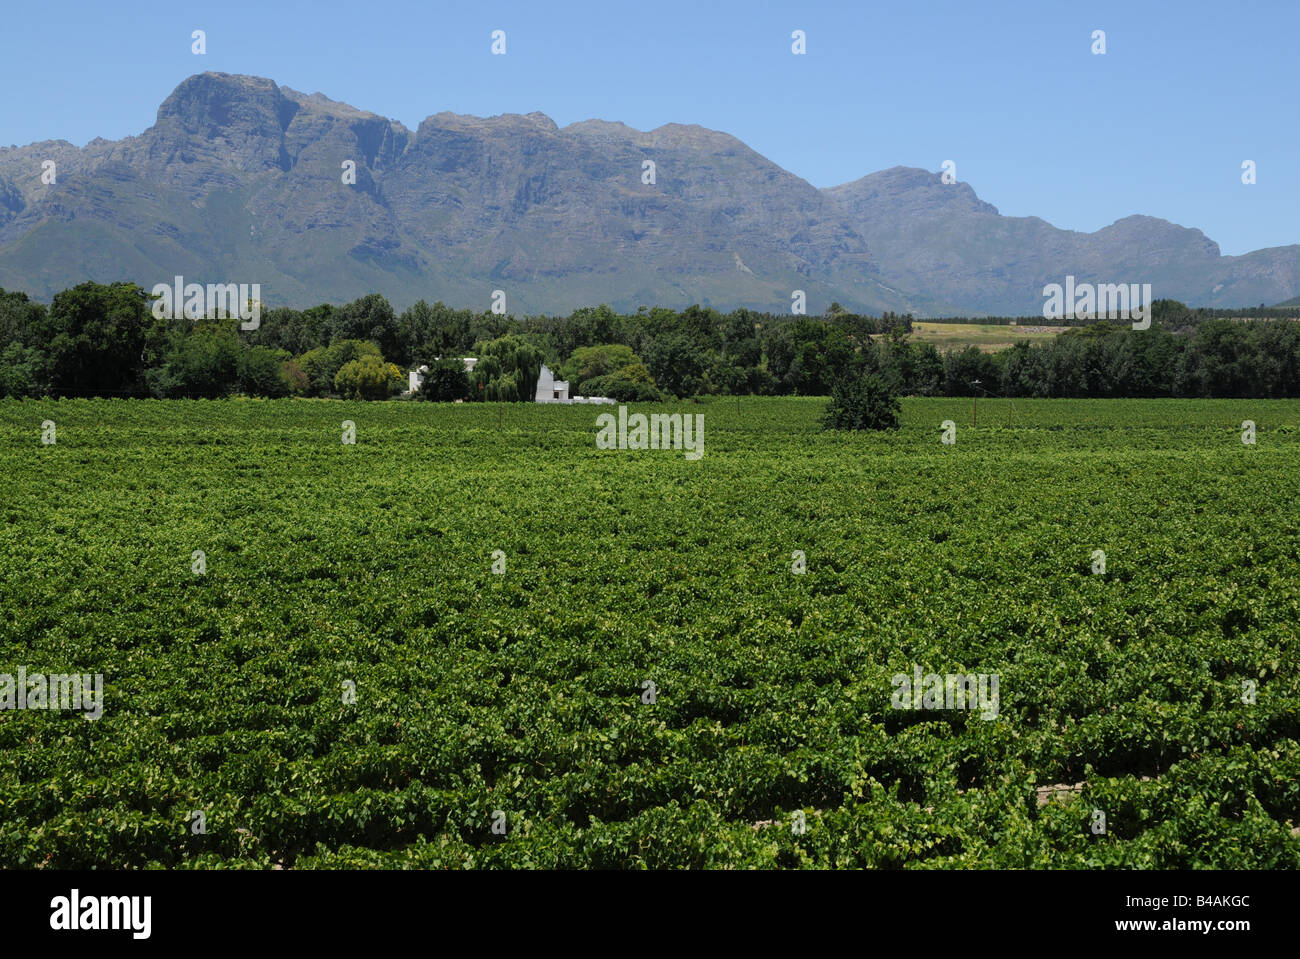 geography / travel, South Africa, landscapes, view from vineyard 'Vrede En Lust', Franschoek, wine-growing area near Cape Town, Additional-Rights-Clearance-Info-Not-Available Stock Photo